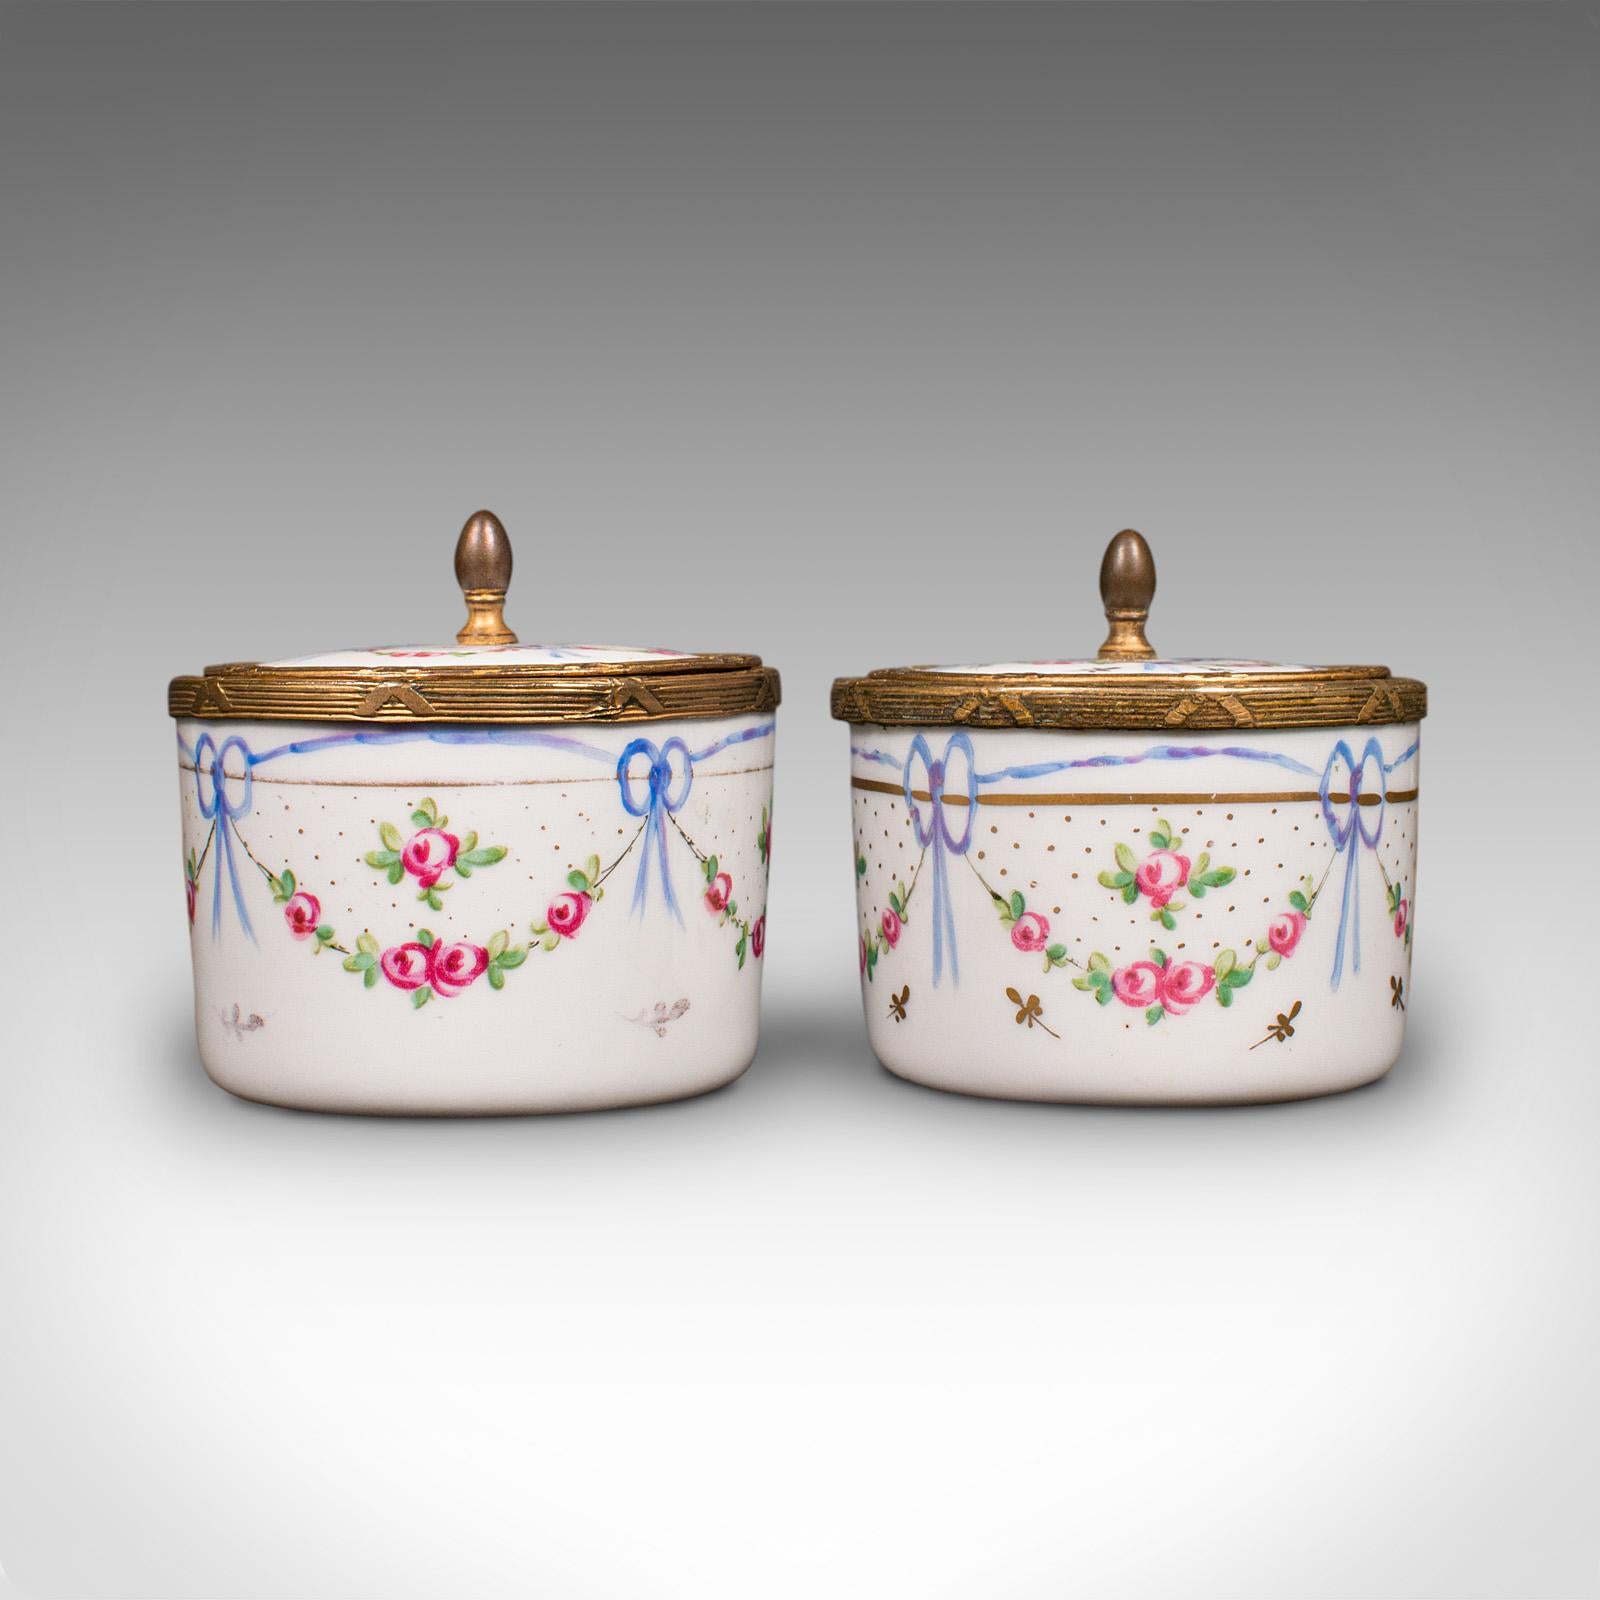 This is a pair of small antique dressing table pots. An English, hand-painted ceramic vanity dish, dating to the late Victorian period, circa 1900.

Delightfully finished vanity pots, with charming decorations
Displaying a desirable aged patina with